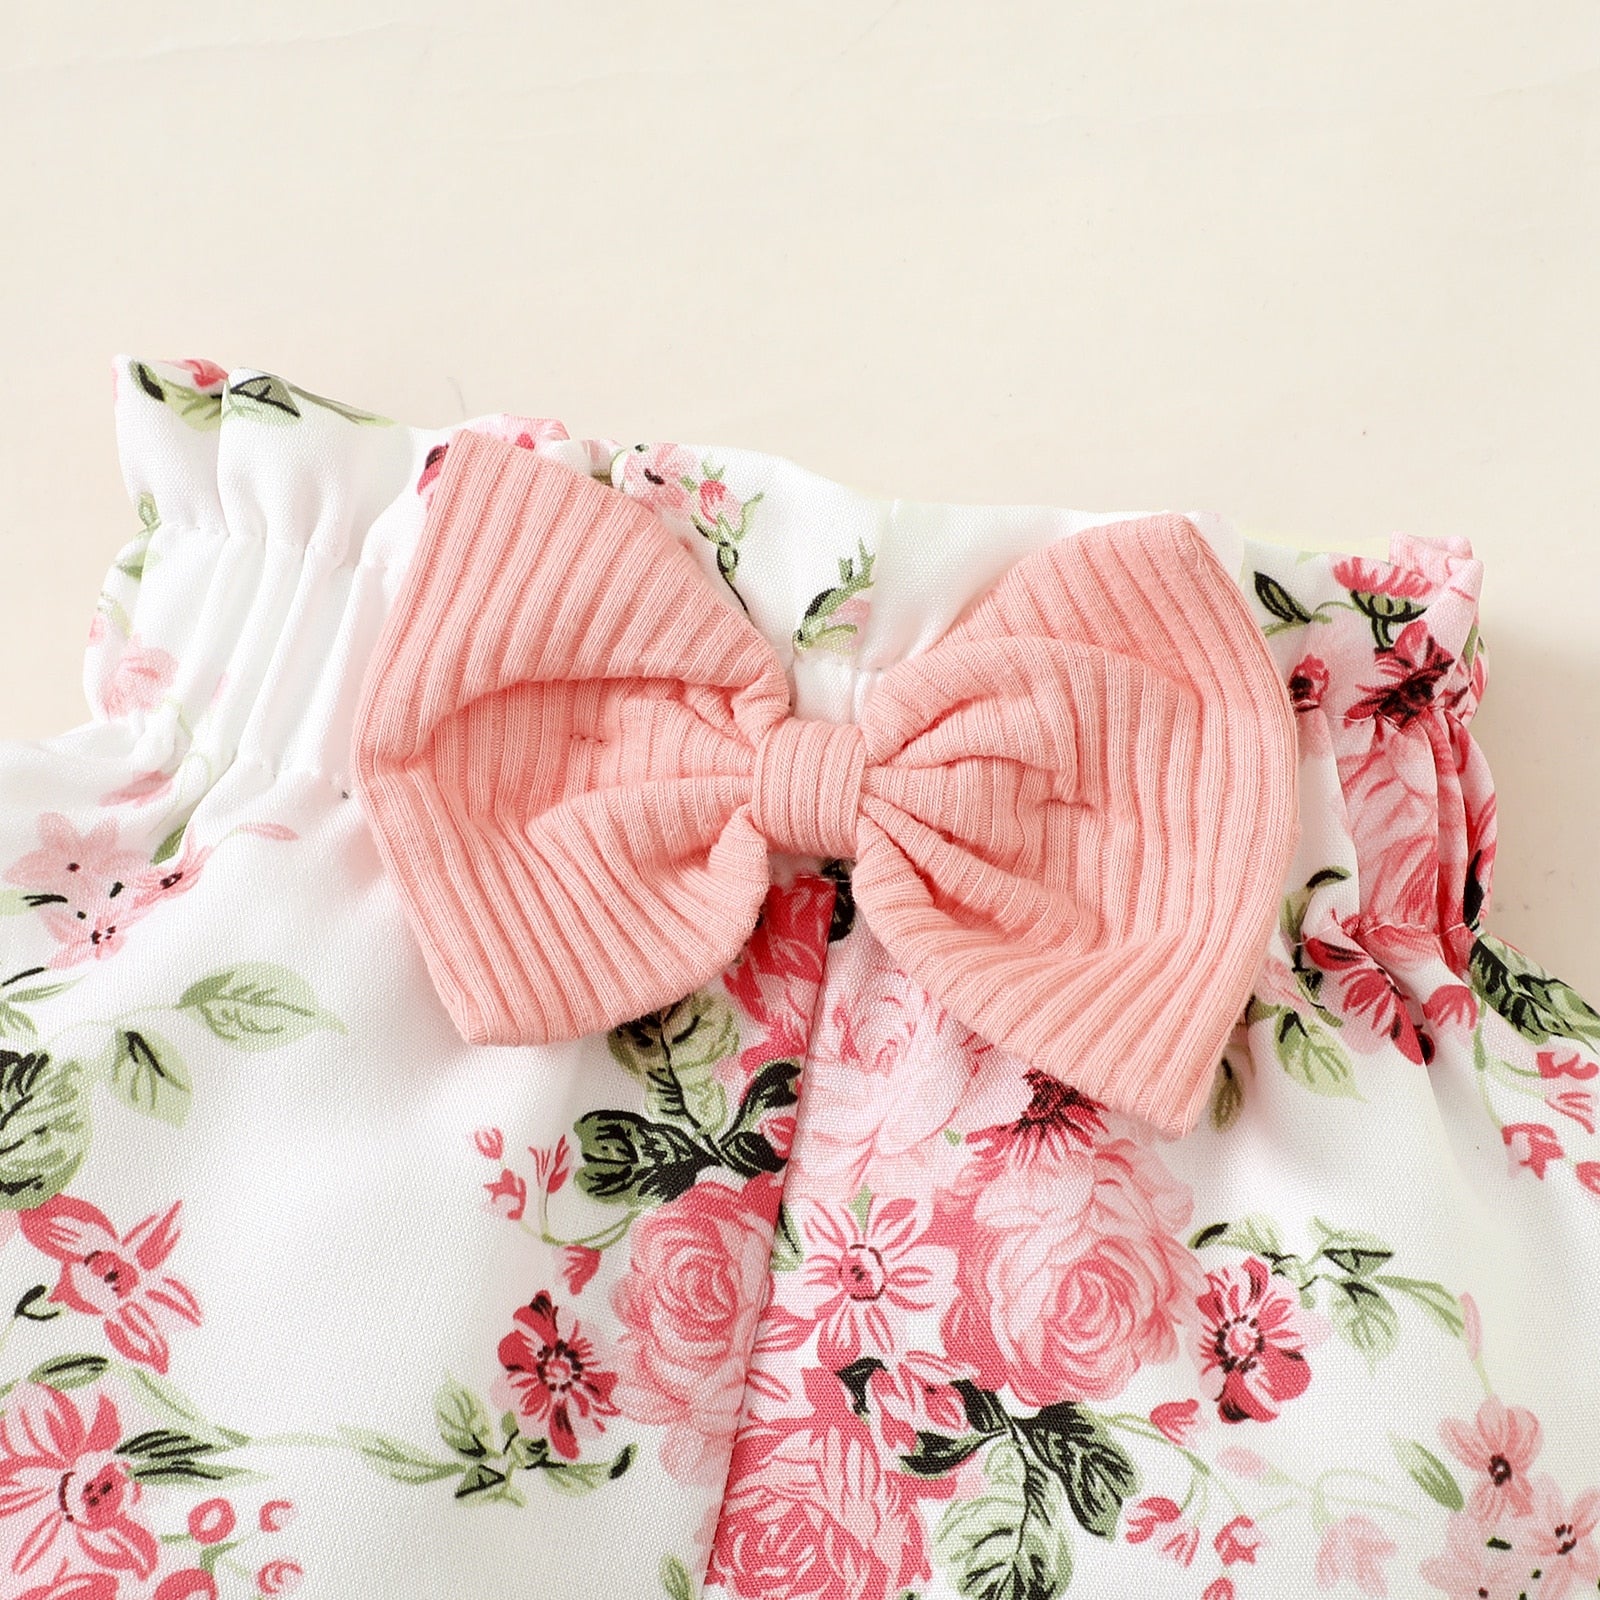 3Pcs Ruffle Romper Tops for Newborn Baby Girl Clothes